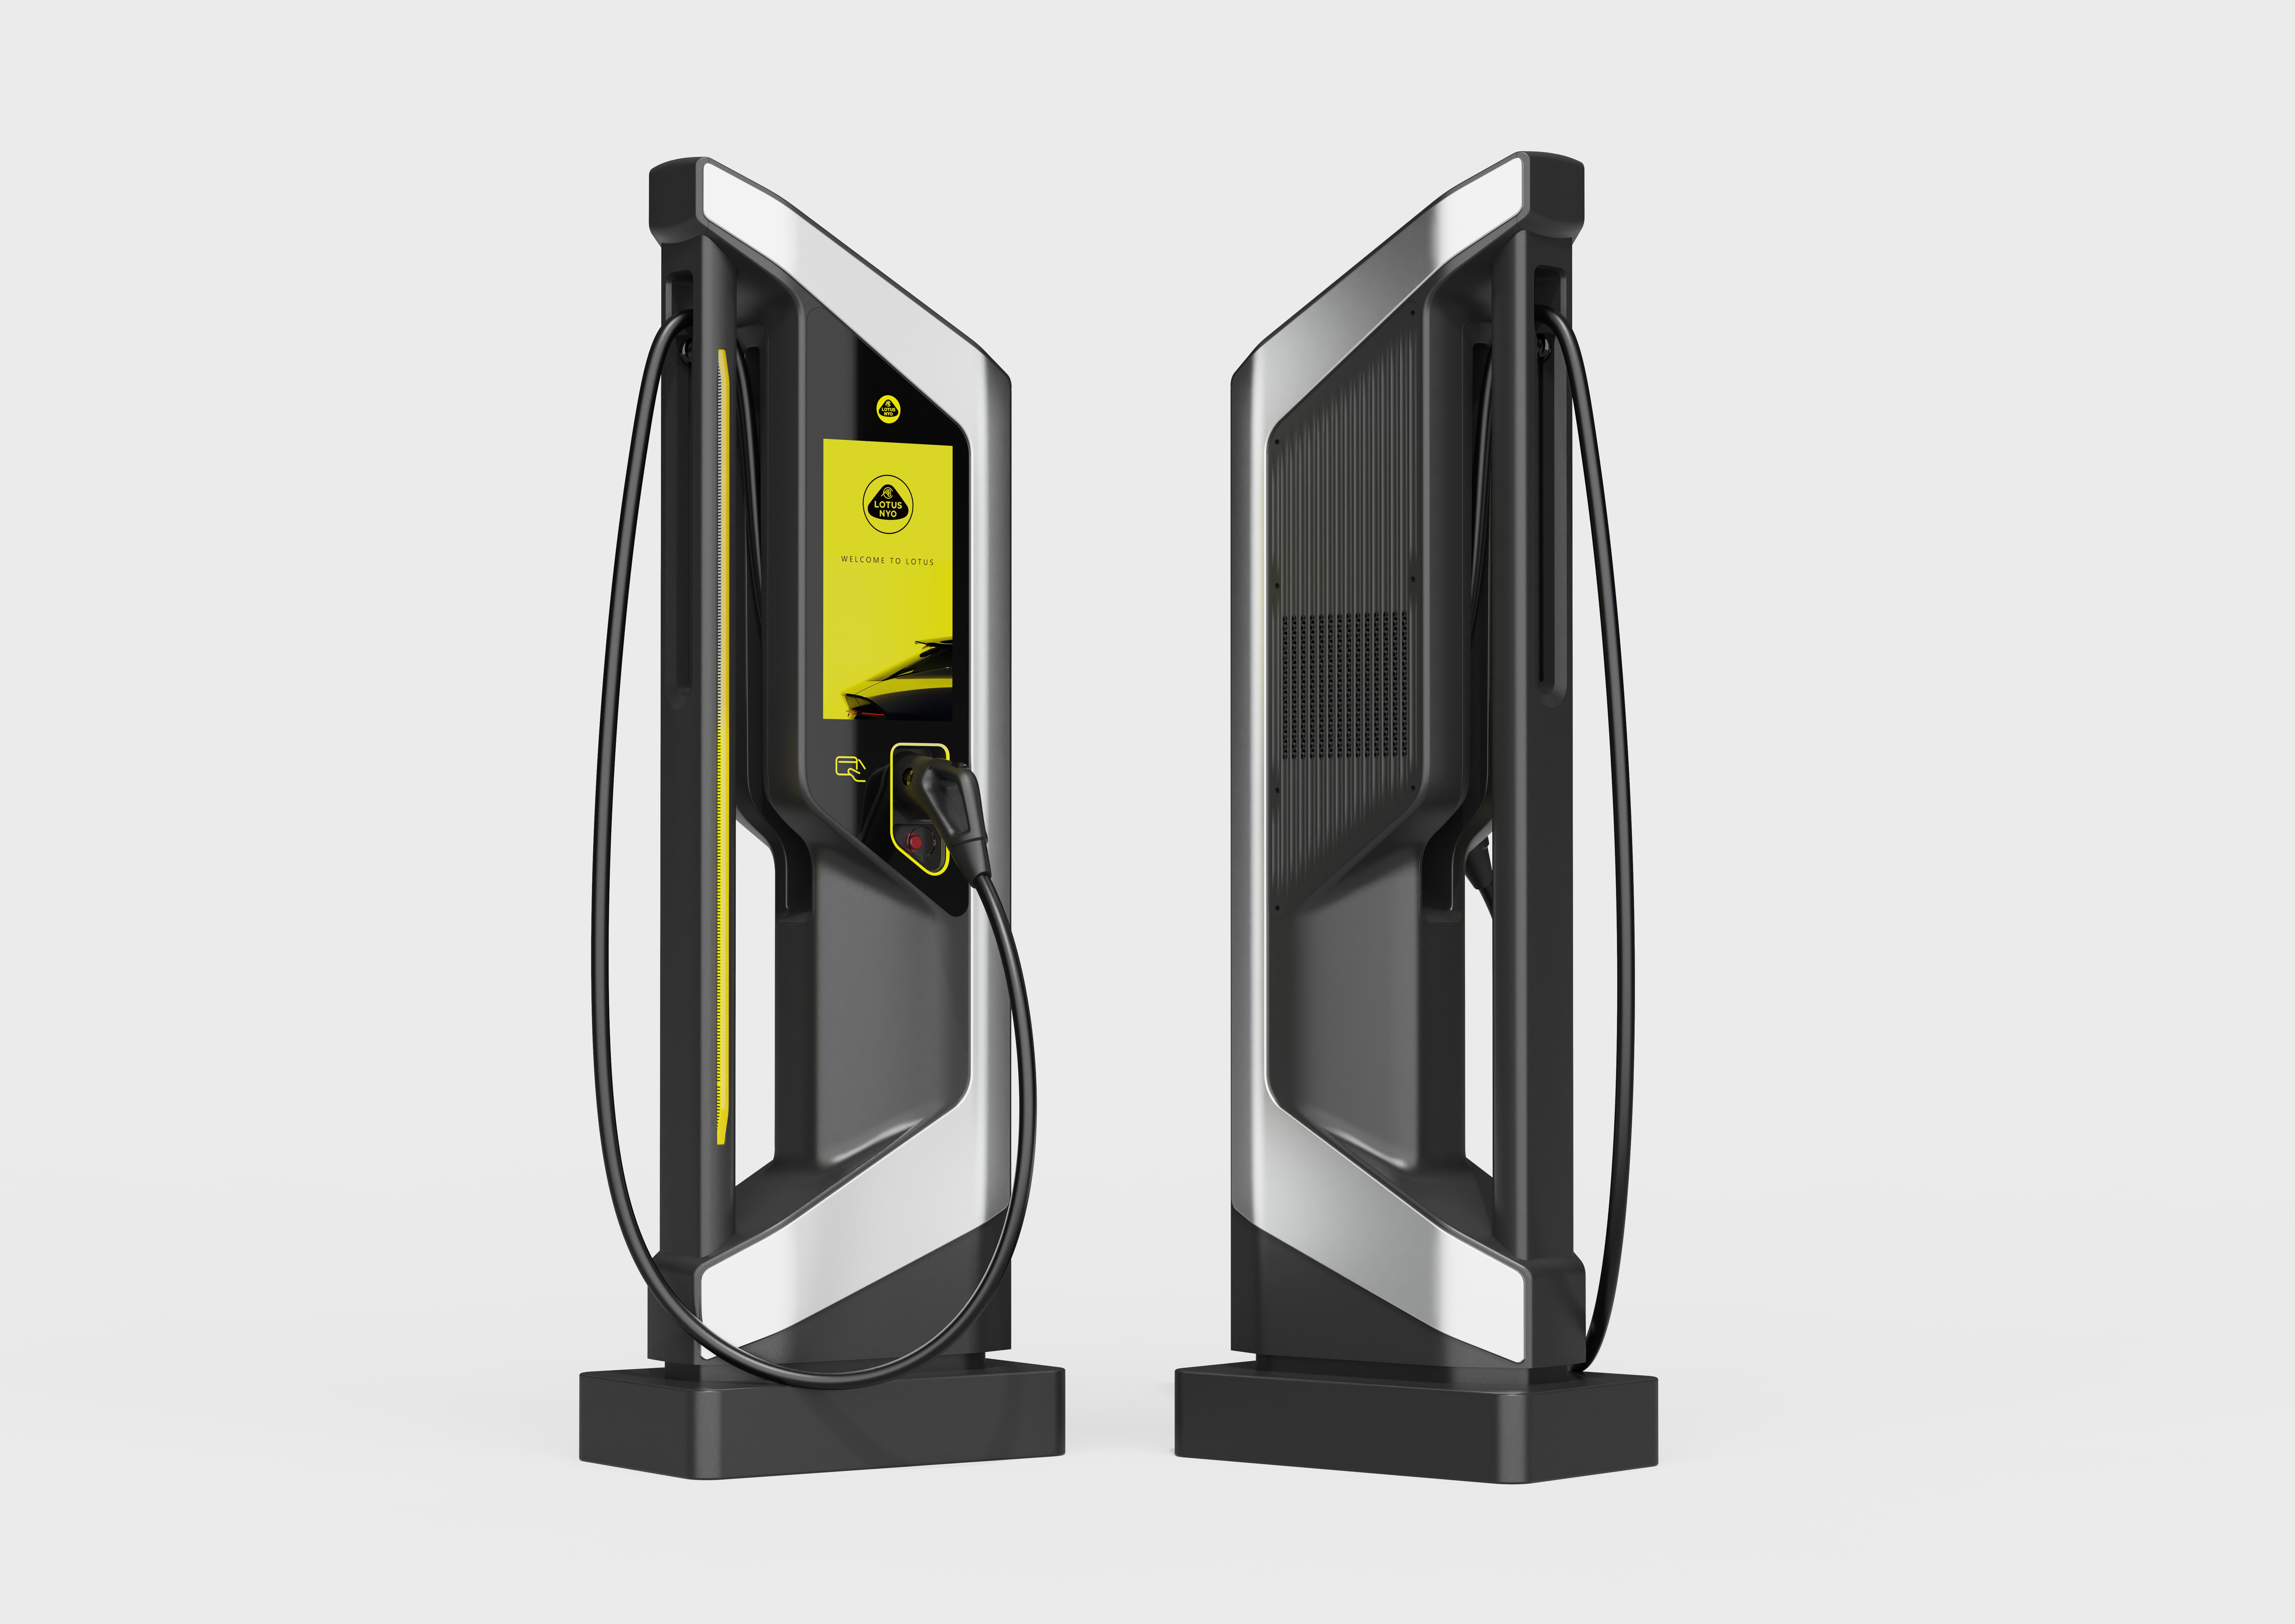 MUSE Design Awards Winner - LOTUS Hyper Flash Charger by Hangzhou Flash Charging New Energy Co.,Ltd